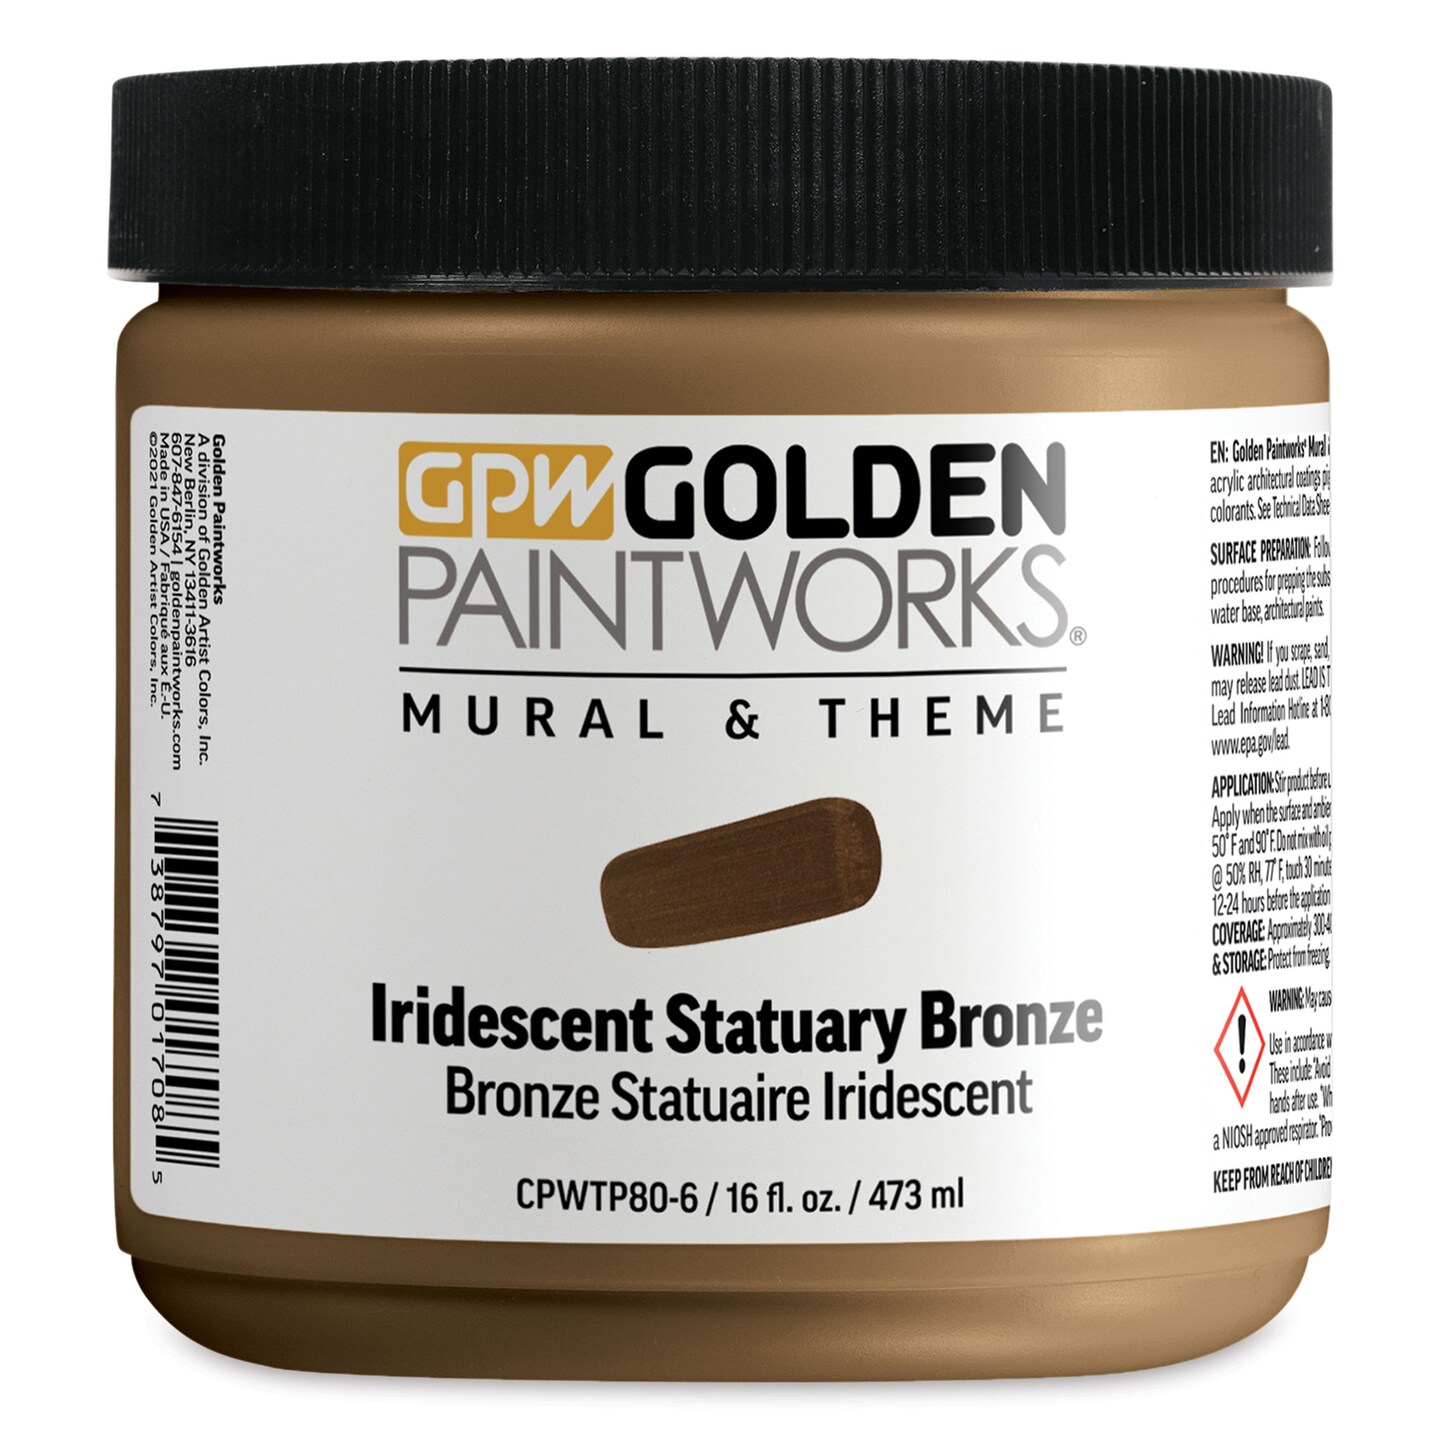 Golden Paintworks Mural and Theme Acrylic Paint - Iridescent Statuary Bronze, 16 oz, Jar